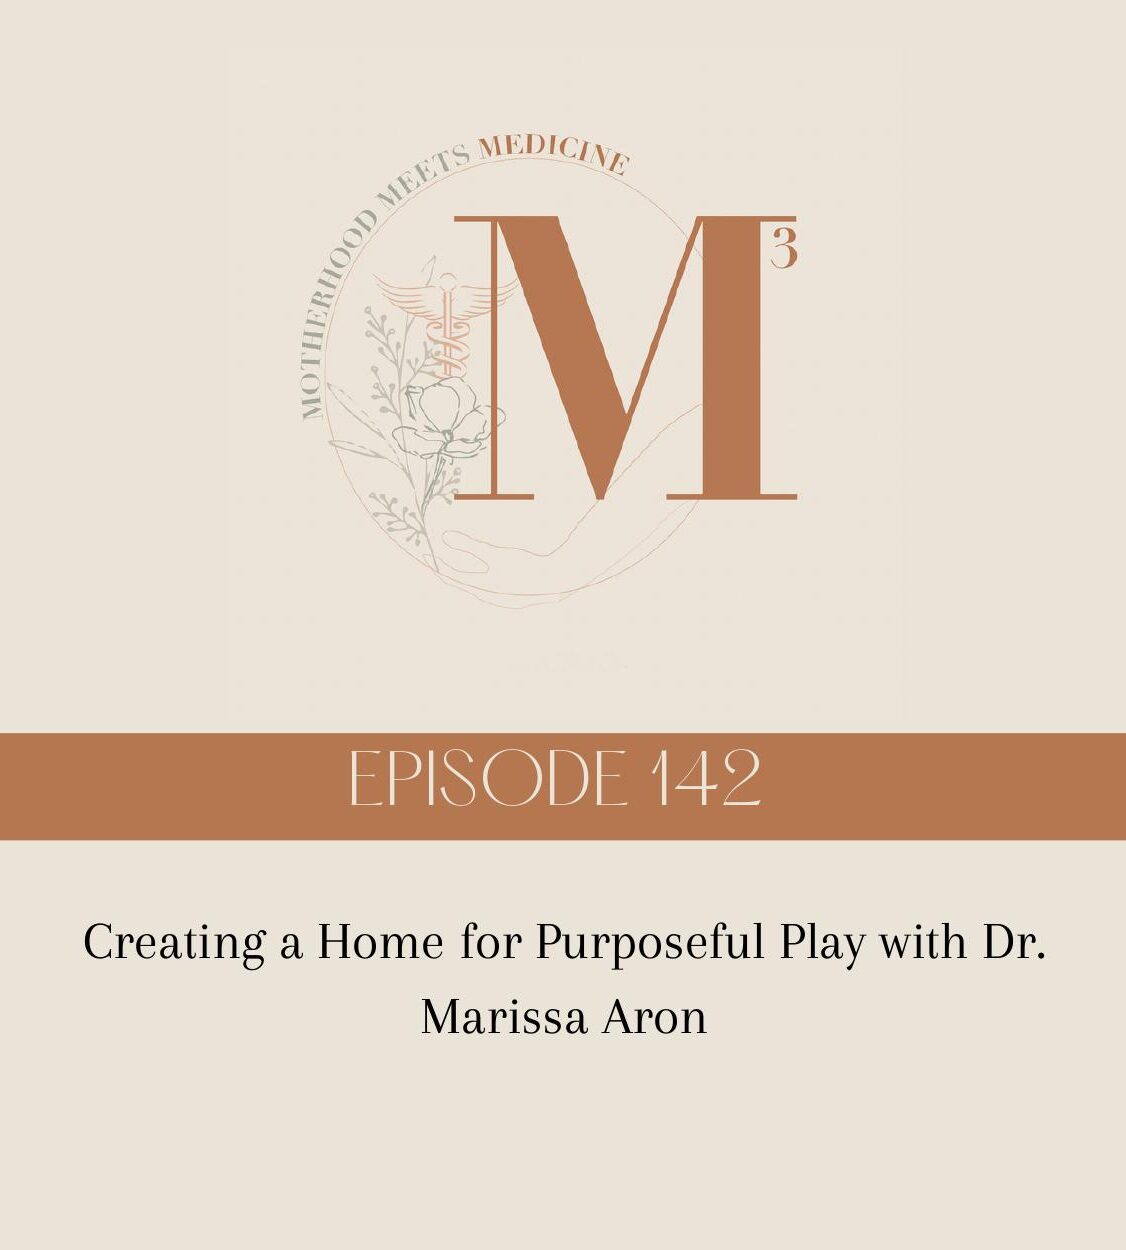 Episode 142: Creating a Home for Purposeful Play with Dr. Marissa Aron